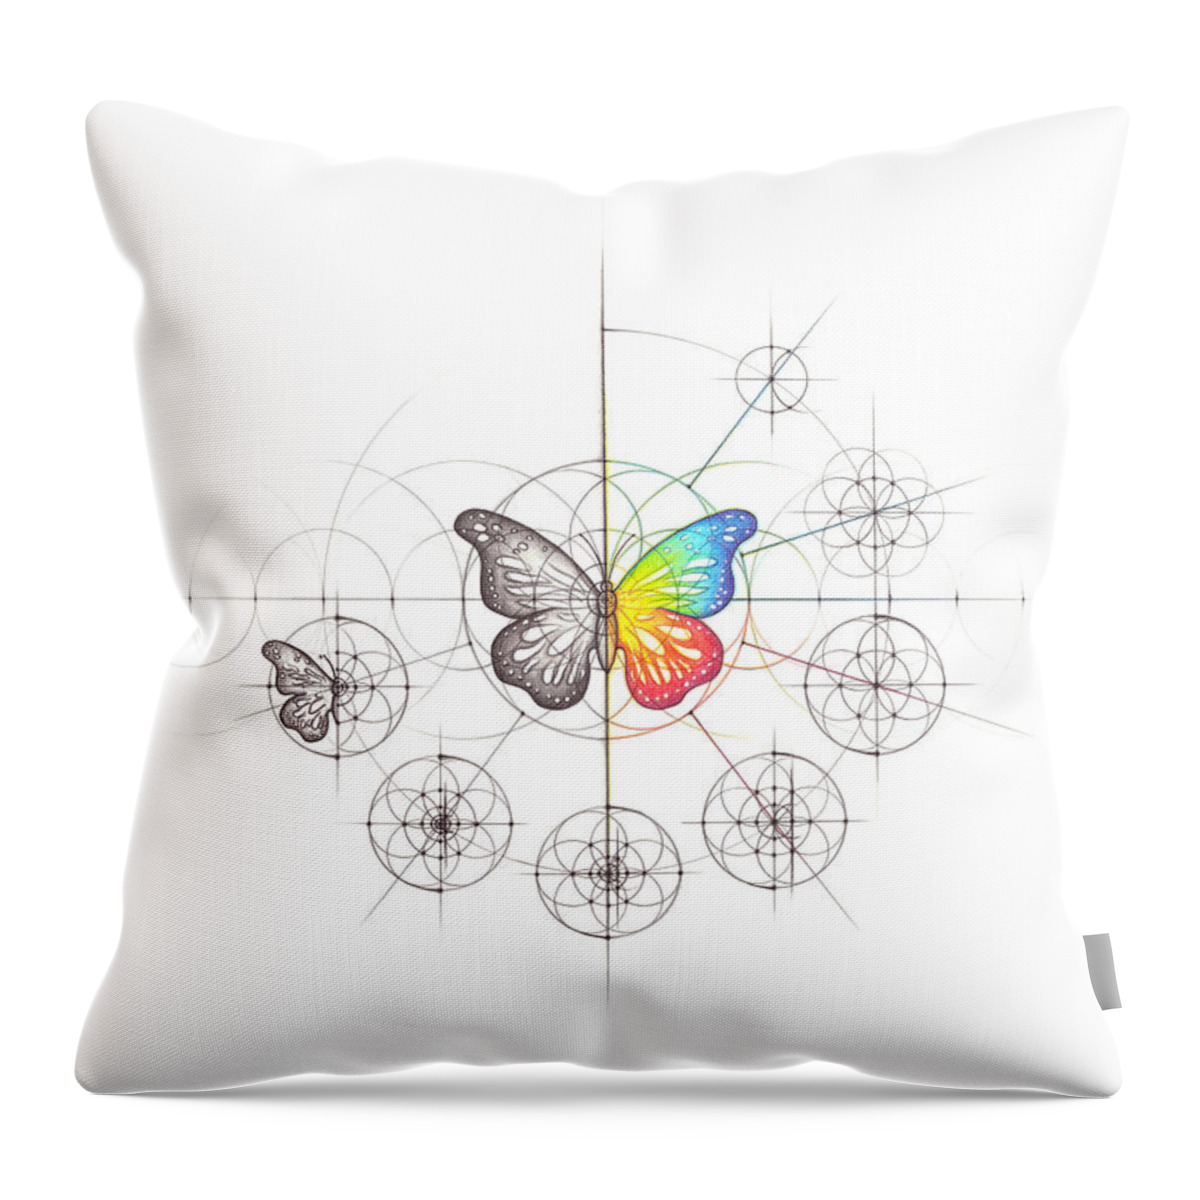 Butterfly Throw Pillow featuring the drawing Intuitive Geometry Butterfly #2 by Nathalie Strassburg